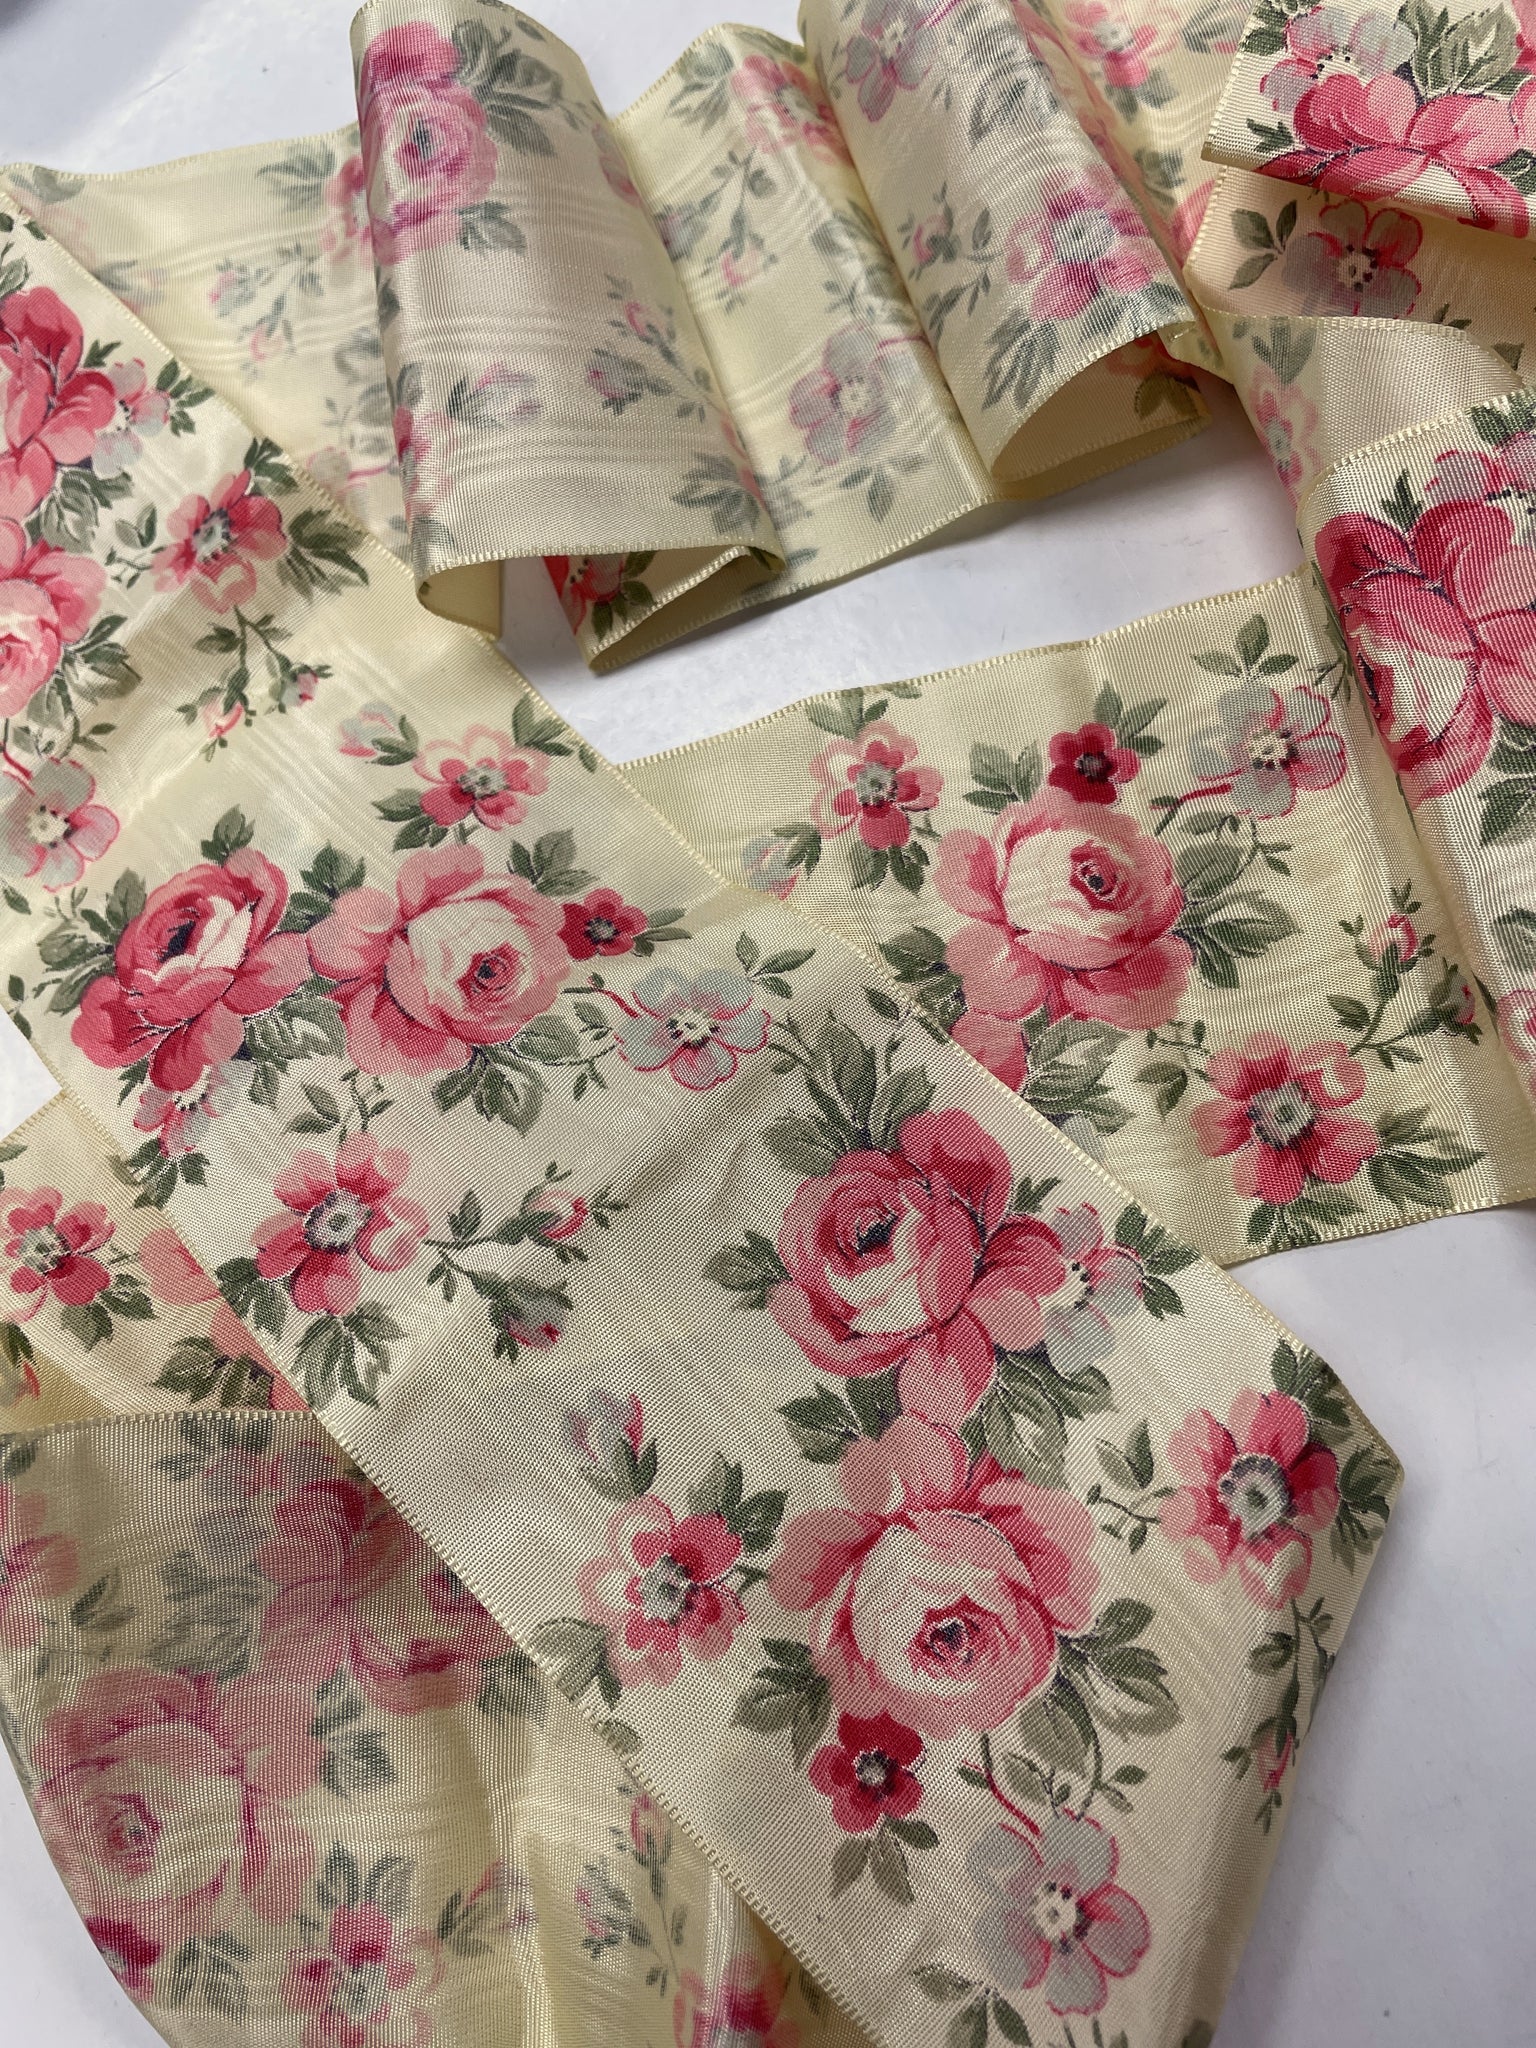 2 YD Silk Moiré Ribbon Vintage - Yellow with Pink Roses